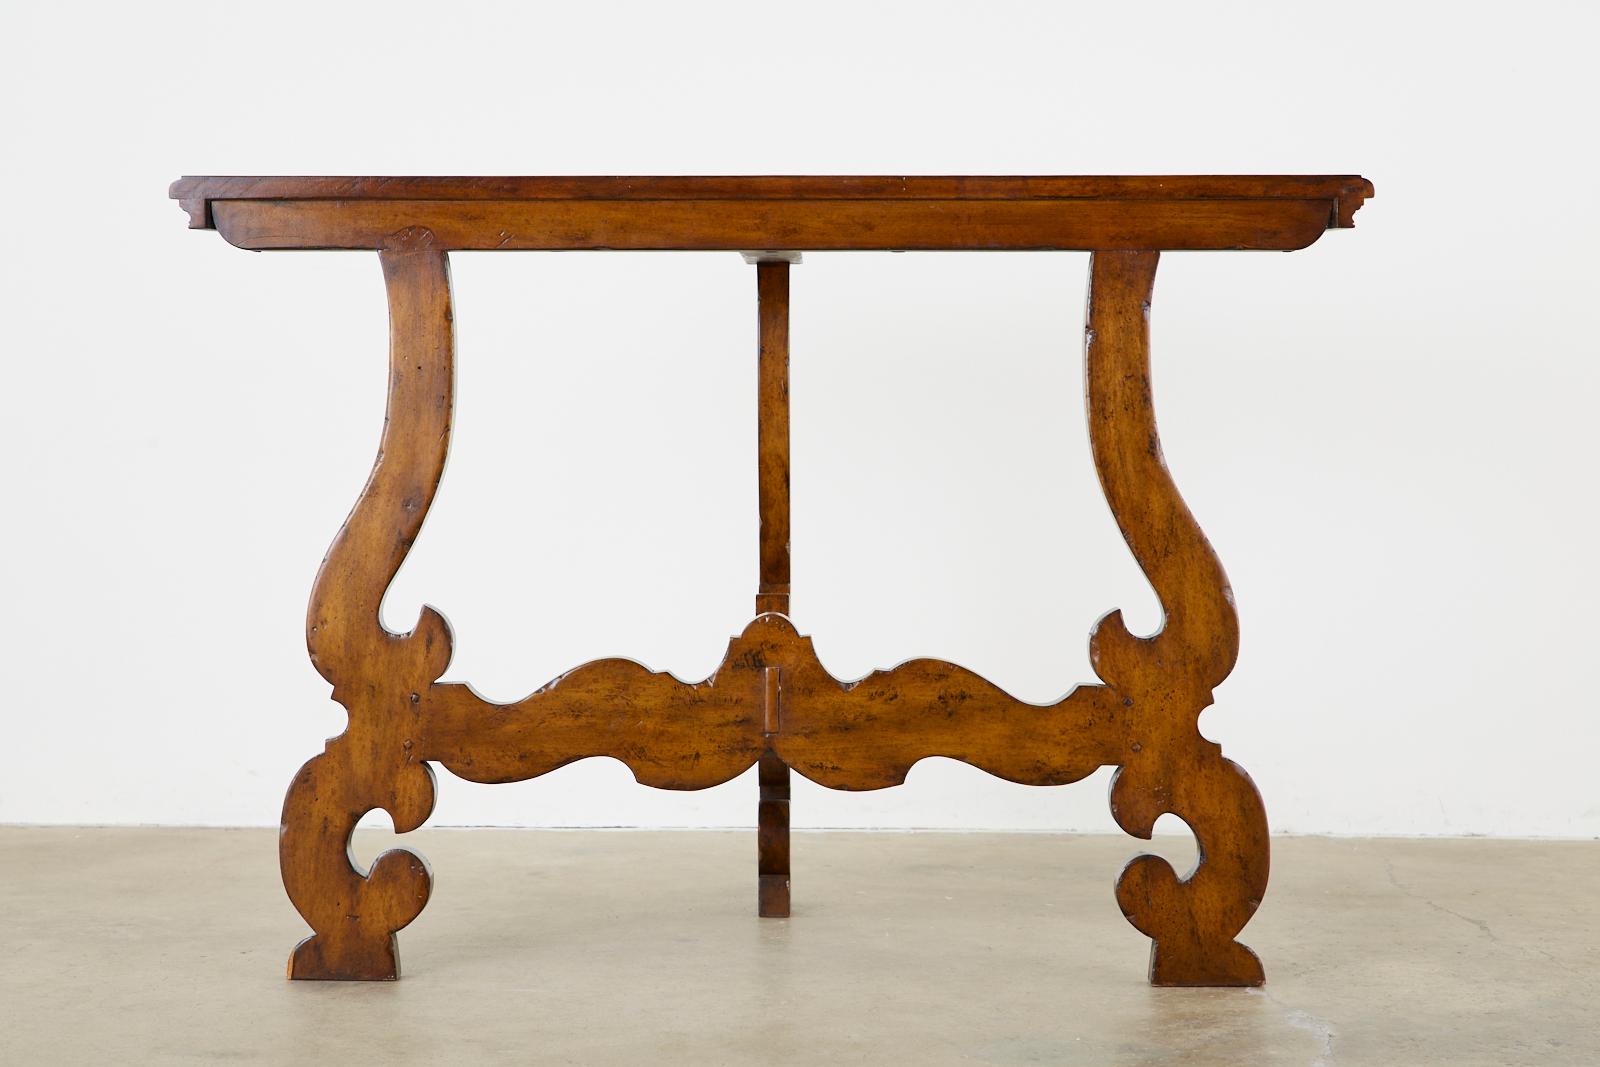 Hand-Crafted Italian Walnut Baroque Style Demilune Console Table